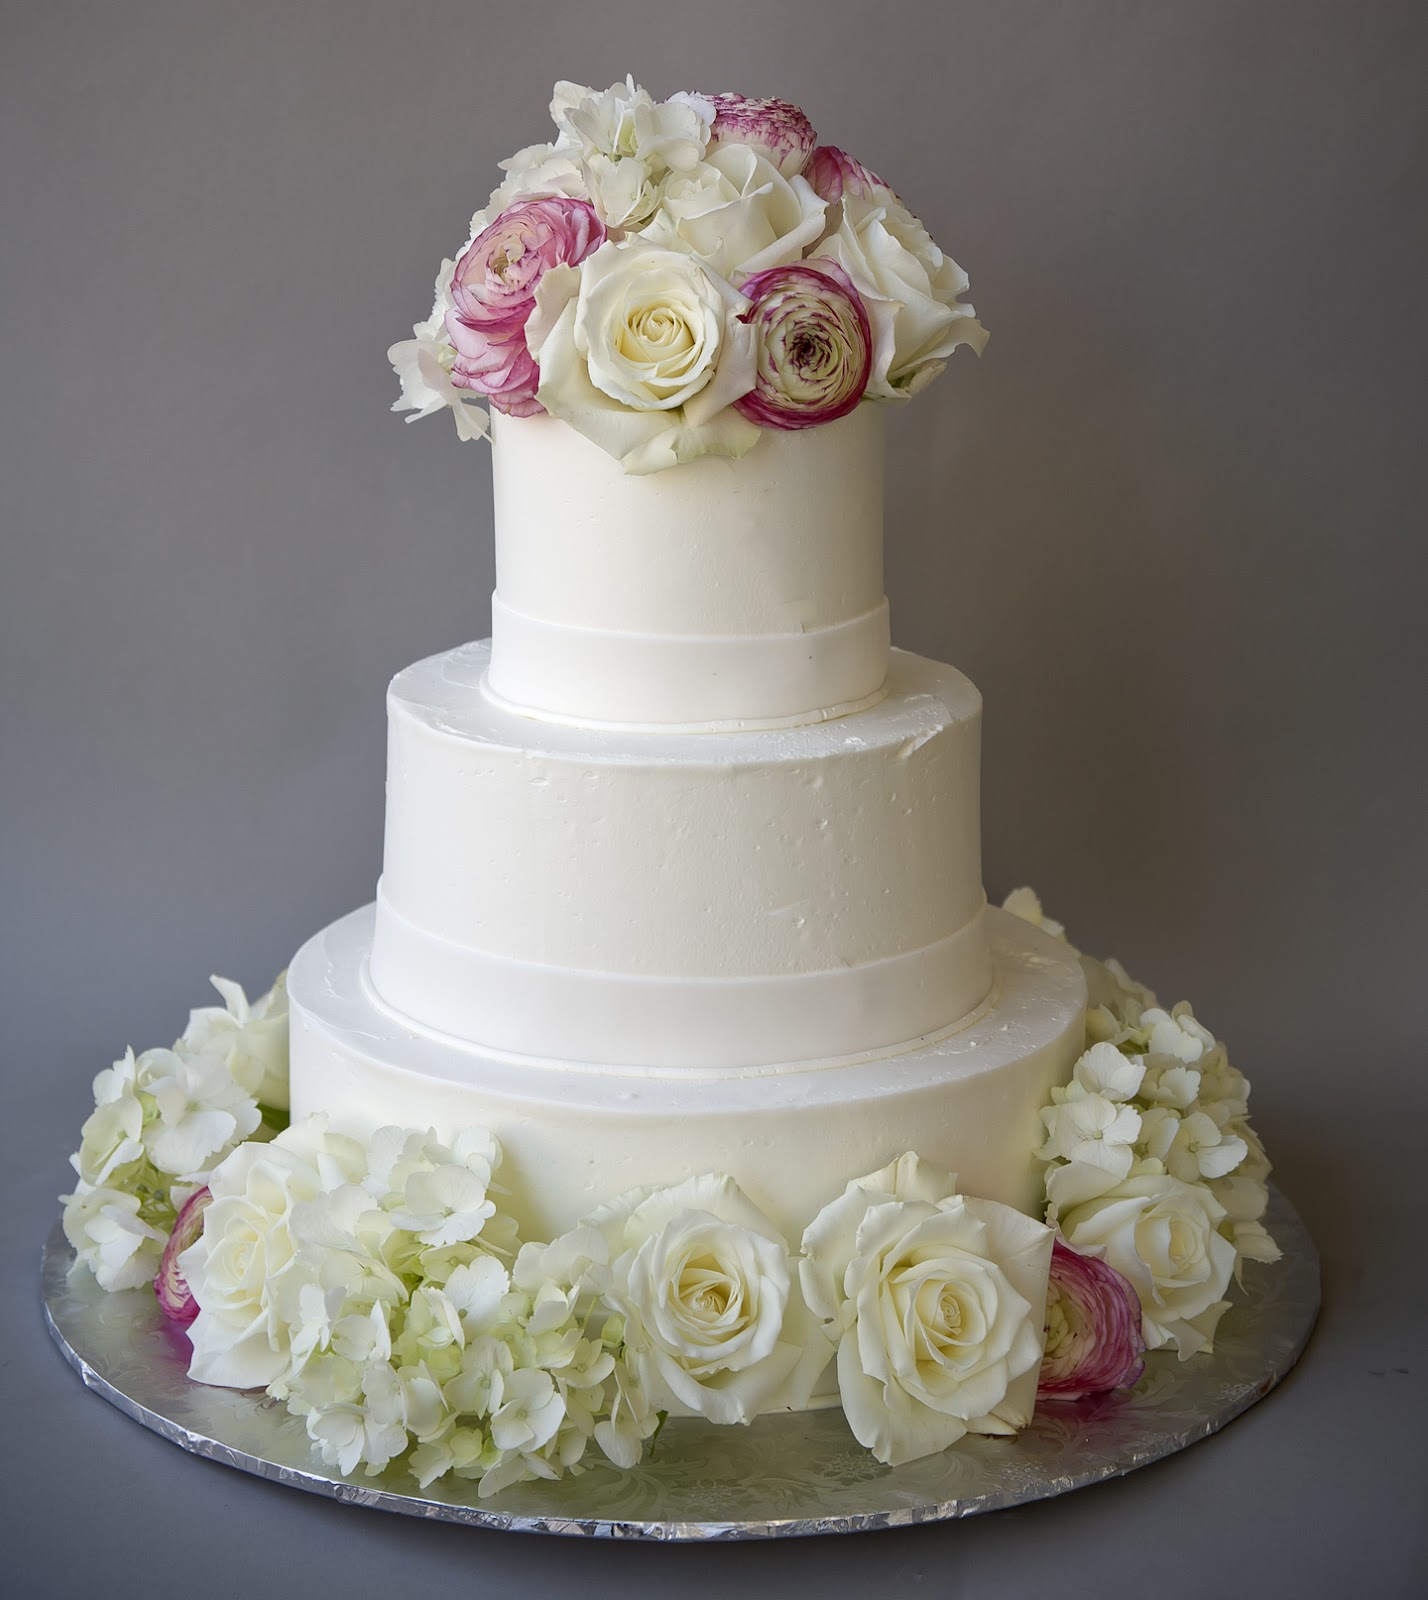 A Simple Cake  Fresh Flowers  for Wedding  Cakes 